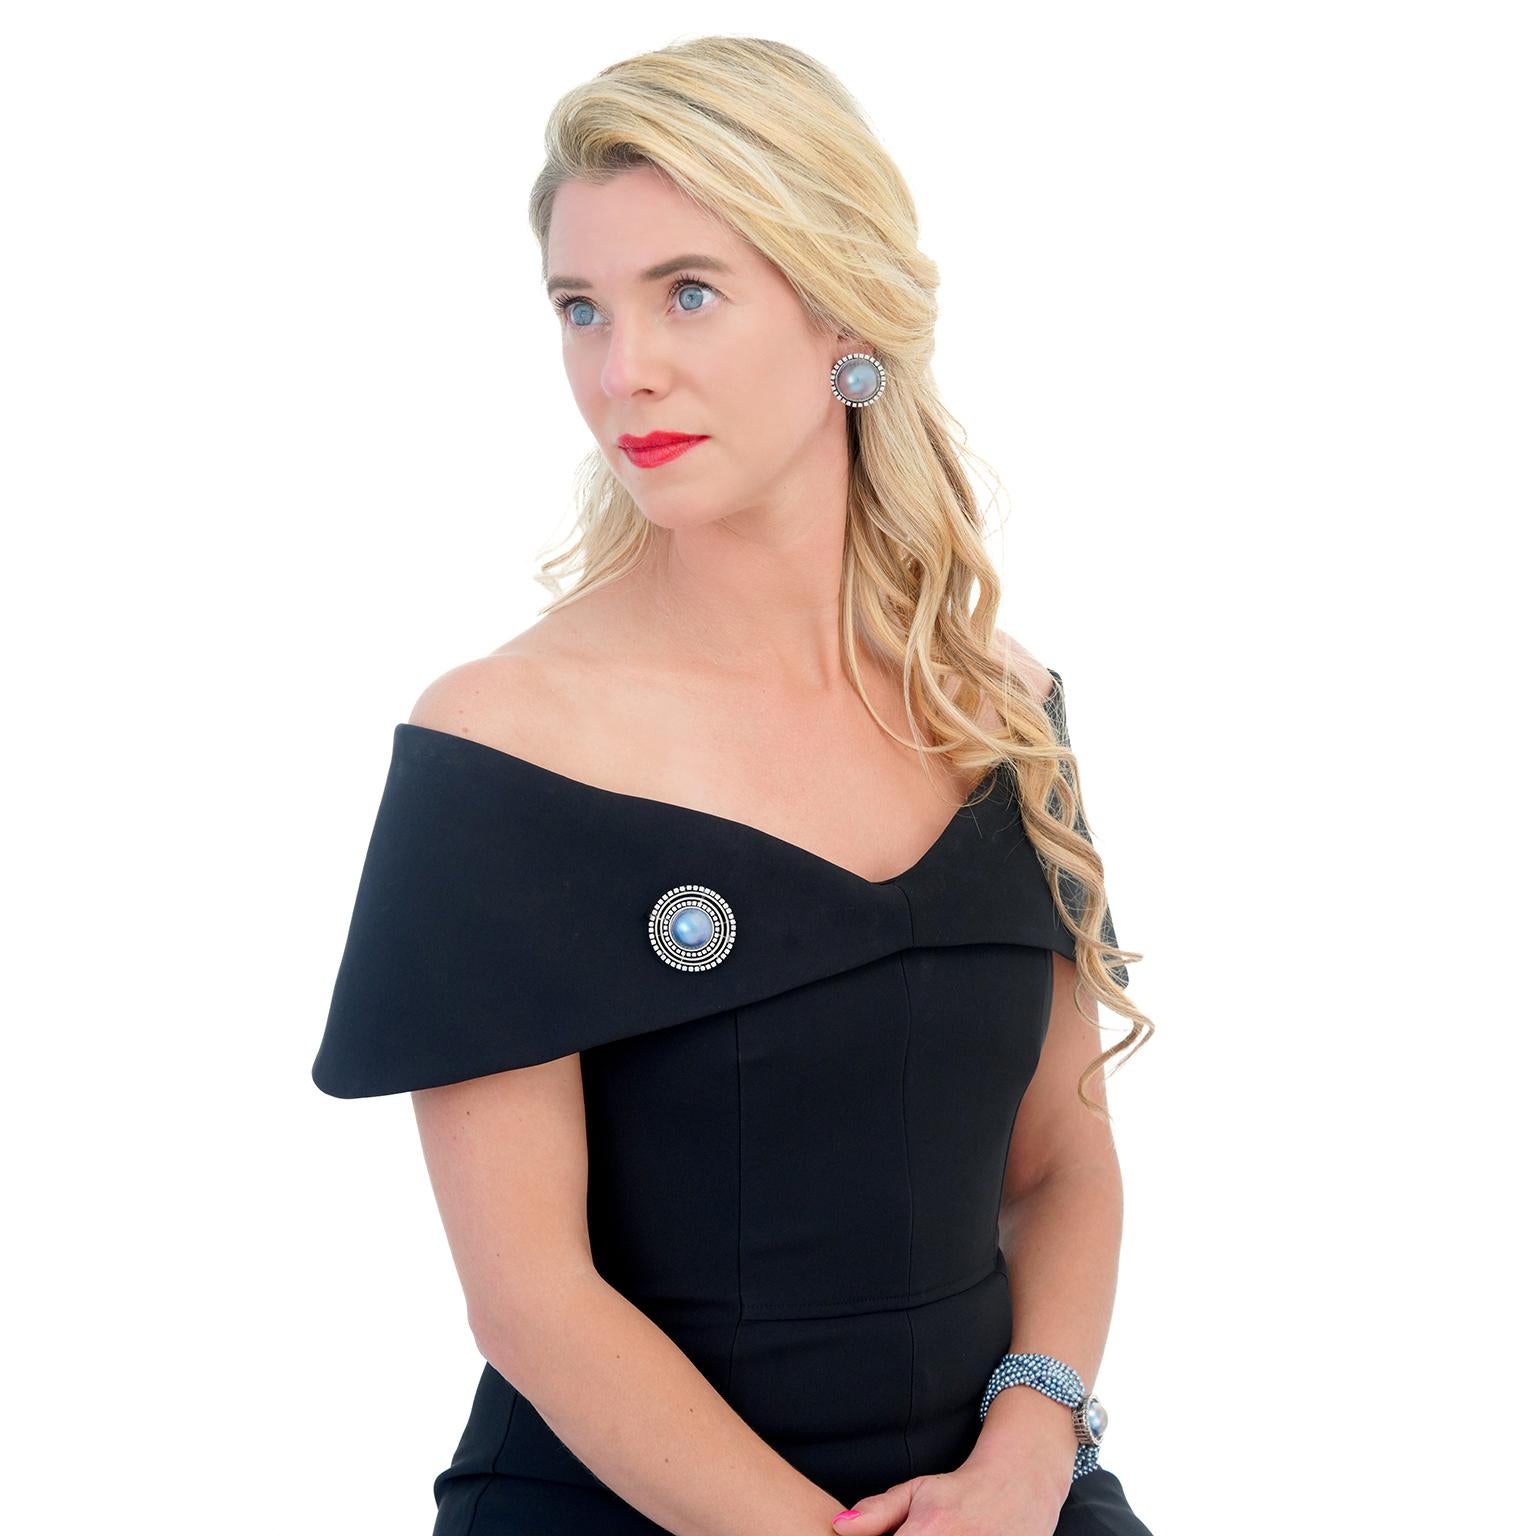 Circa 18k, c1990s Switzerland.  This striking Swiss Modern brooch features a 20.0-millimeter delicately iridescent Tahitian pearl and 3.0 carats of brilliant white diamonds (H color, SI1 clarity). Exceptionally contemporary, it is perfect for the